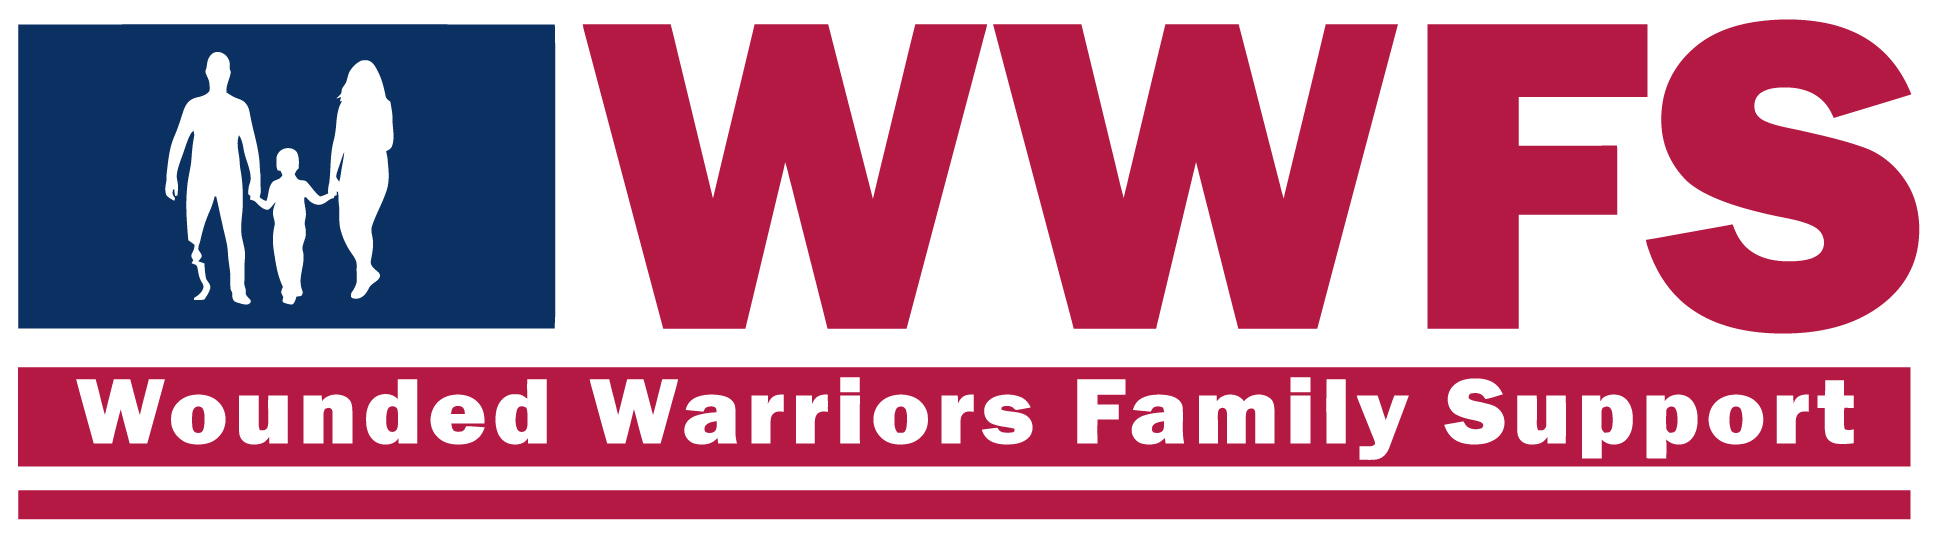 Wounded Warriors Family Support (WWFS)